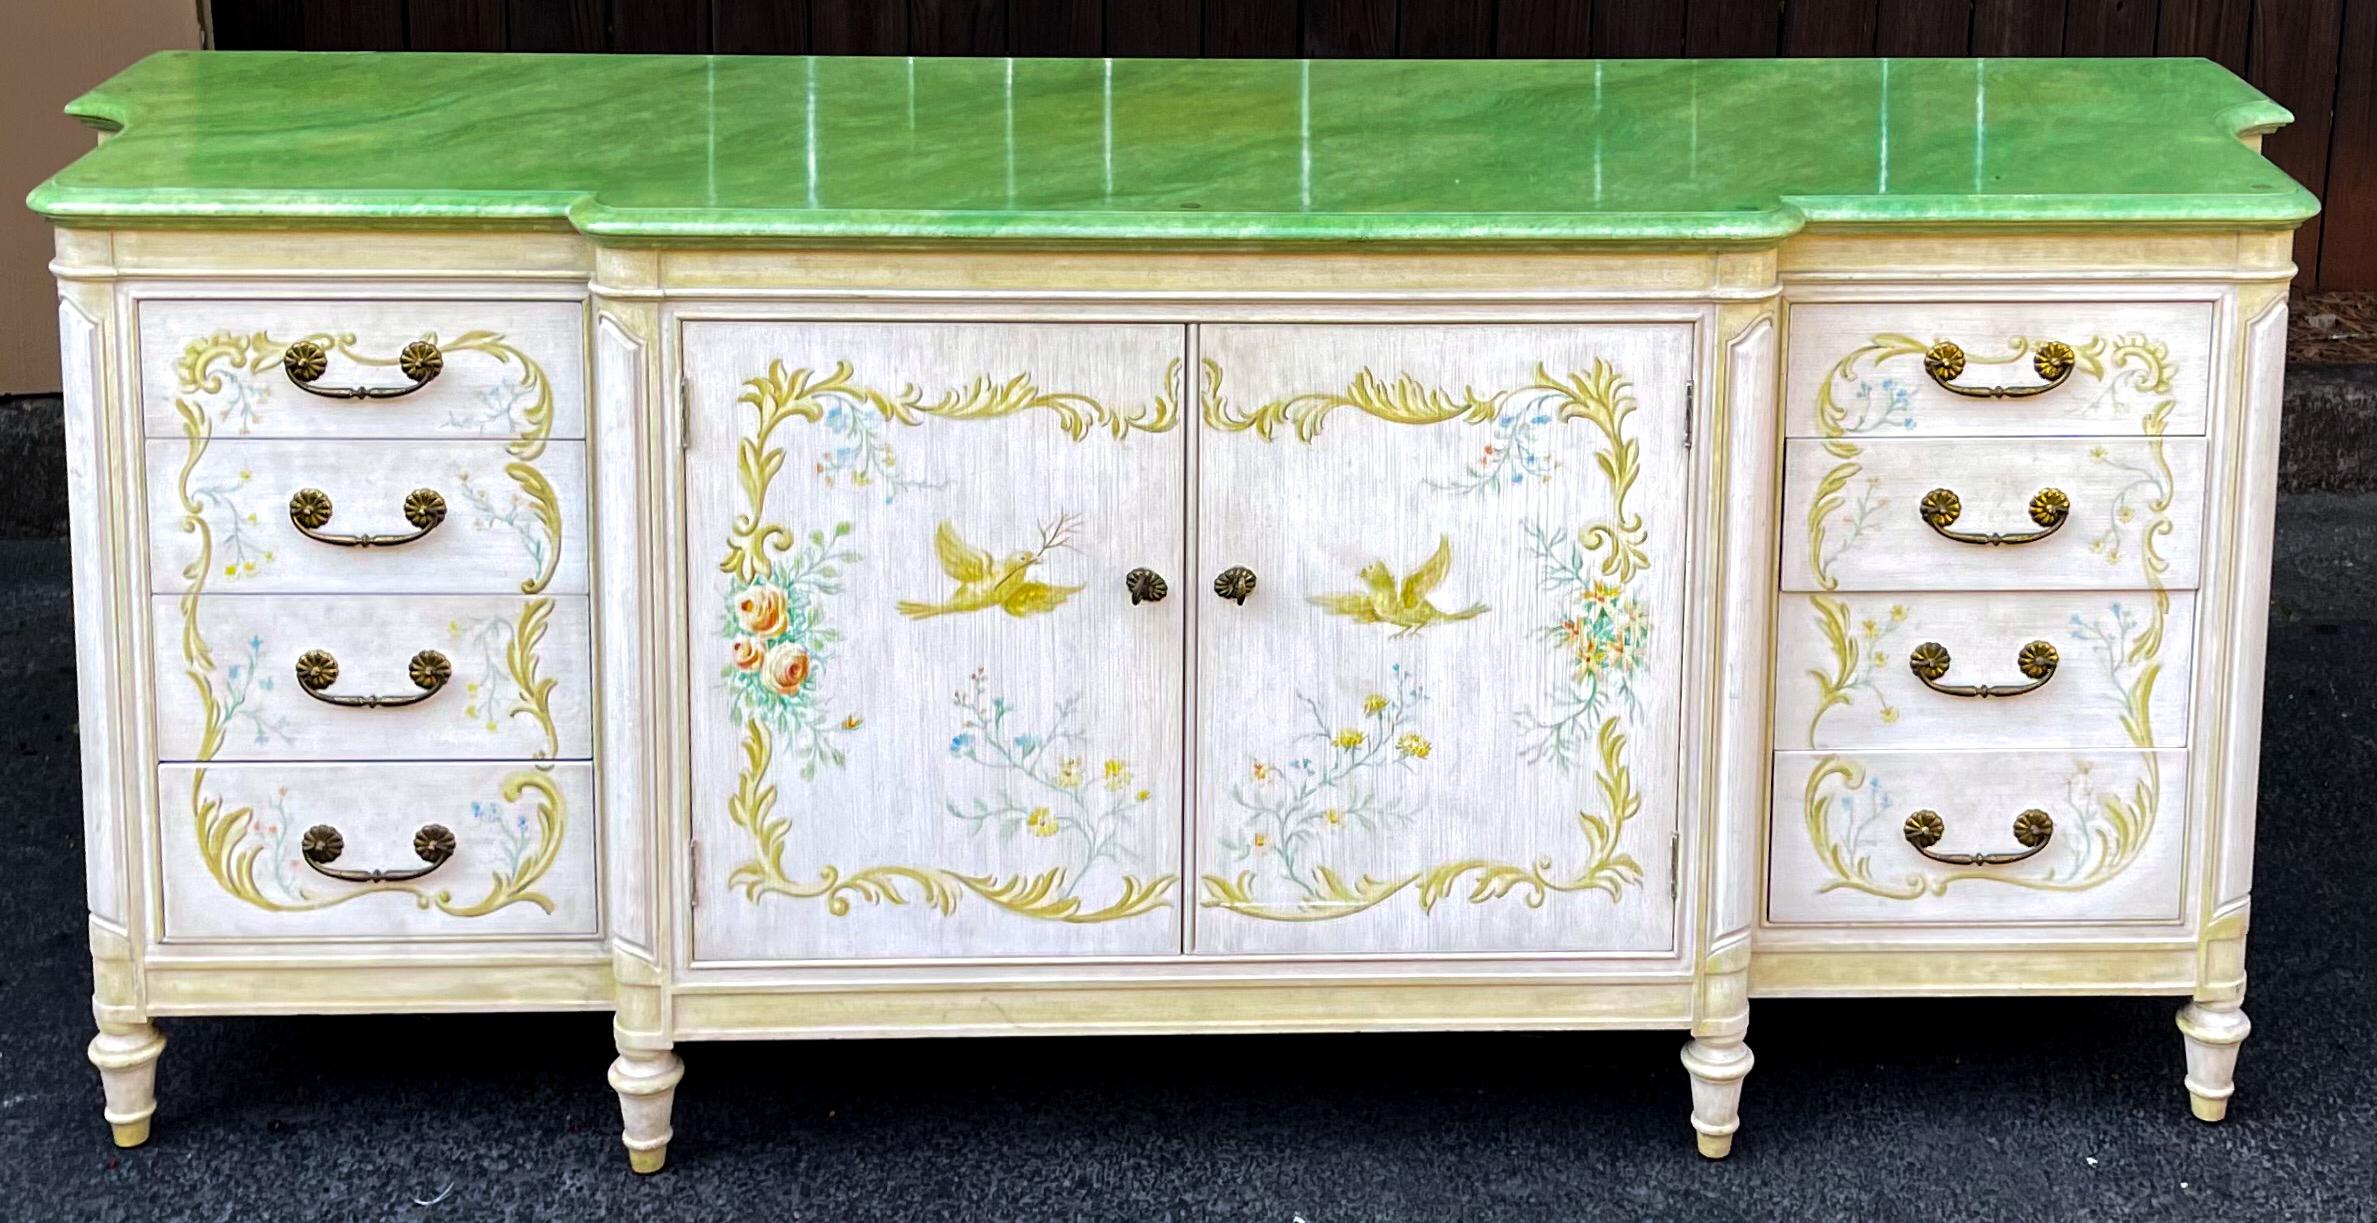 This is a large scale Venetian style hand painted cabinet with faux marble top. A versatile piece! It could work from sideboard to bath to foyer to changing table! It is unmarked and dates to the 60s.

My shipping is Continental US only.